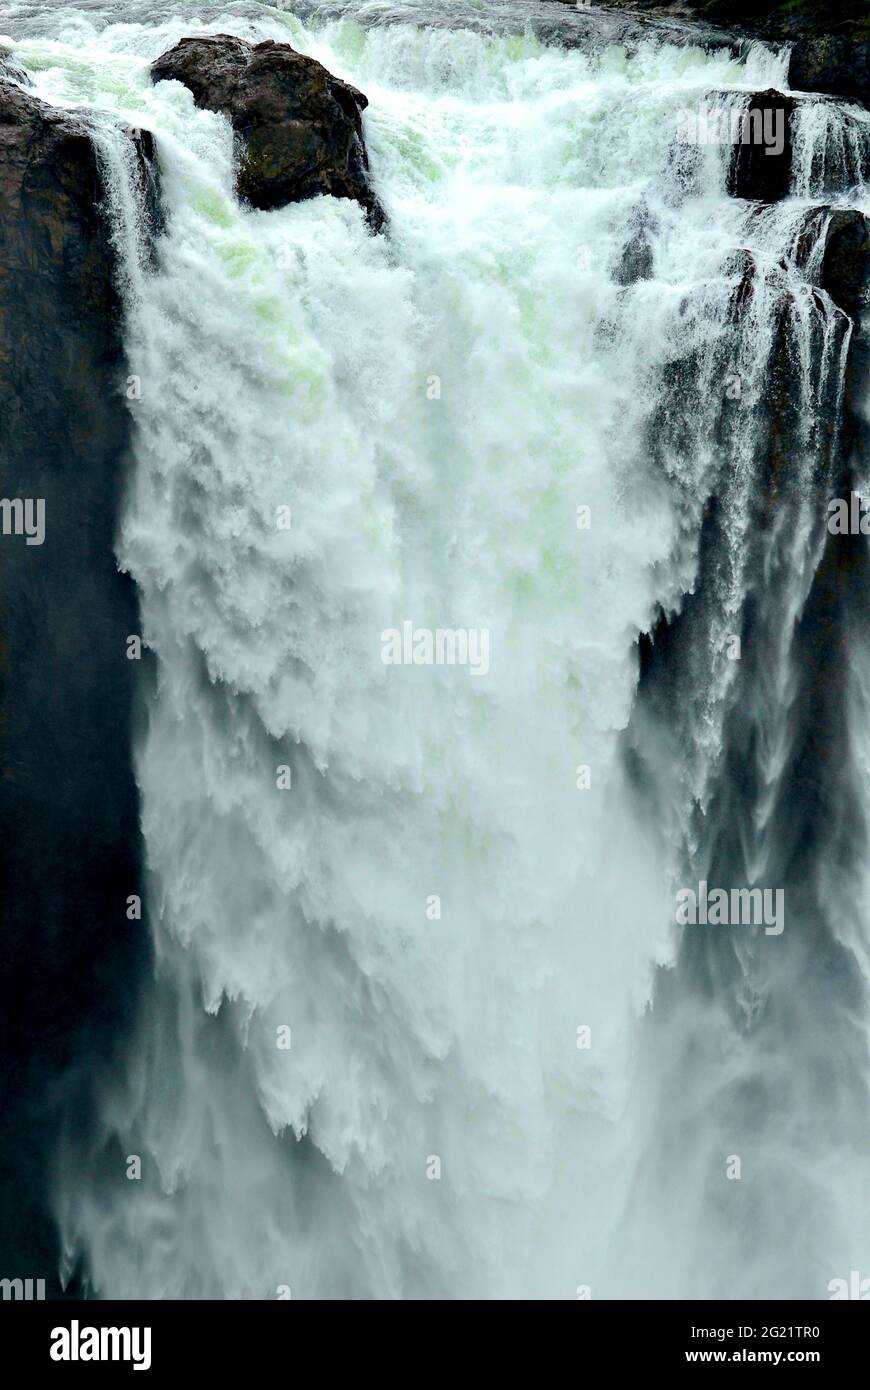 Water crashes down Snoqualmie Falls in Snoqualmie, Washington, USA, on a cold winter day. Stock Photo